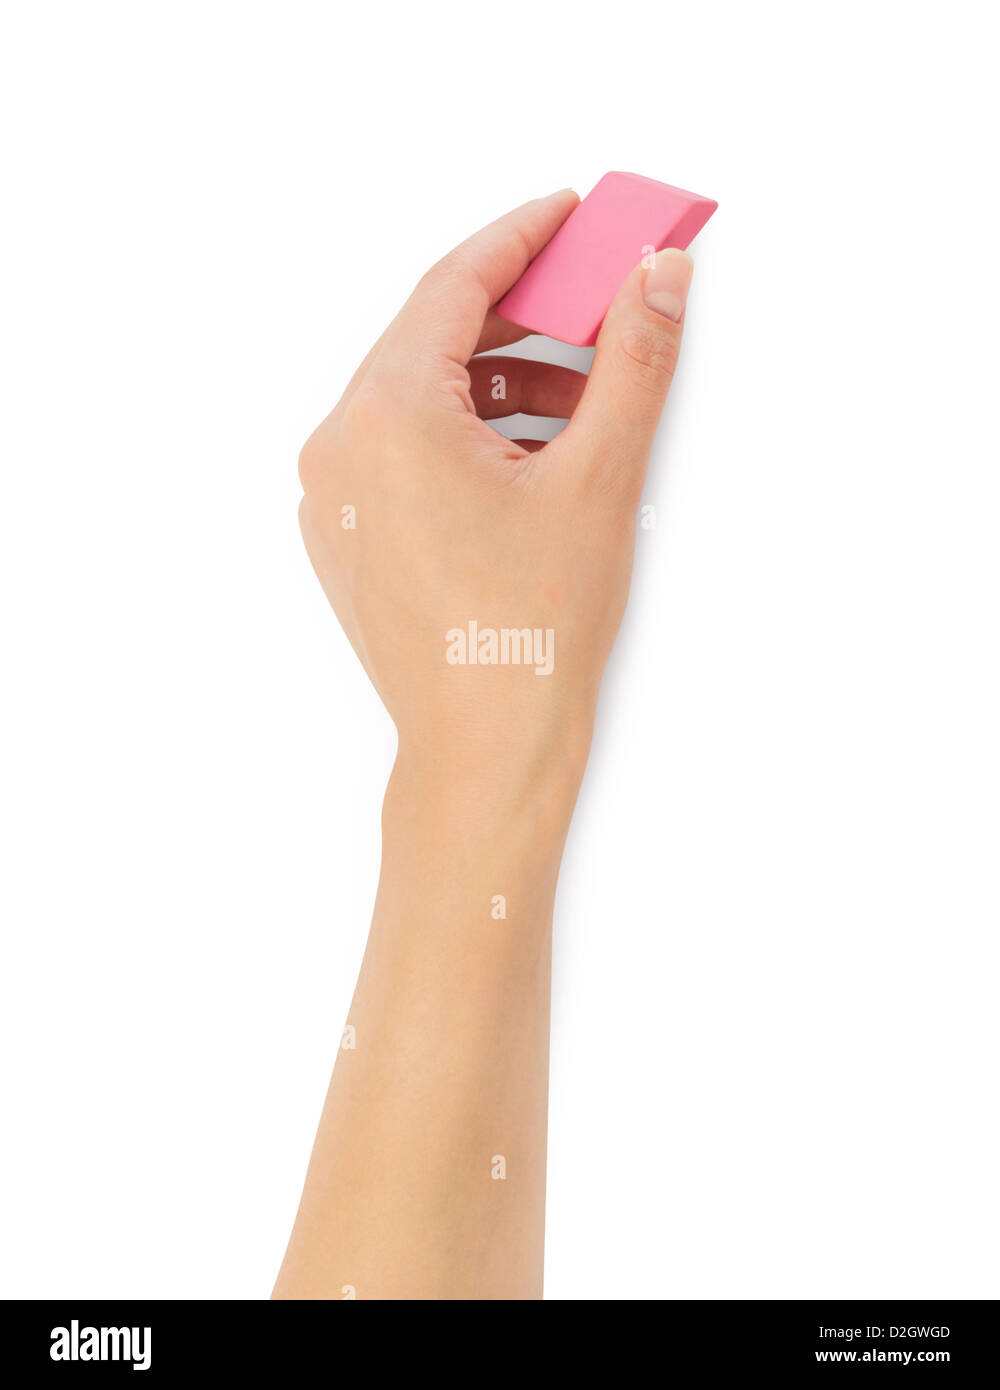 human hands with erase rubbe Stock Photo